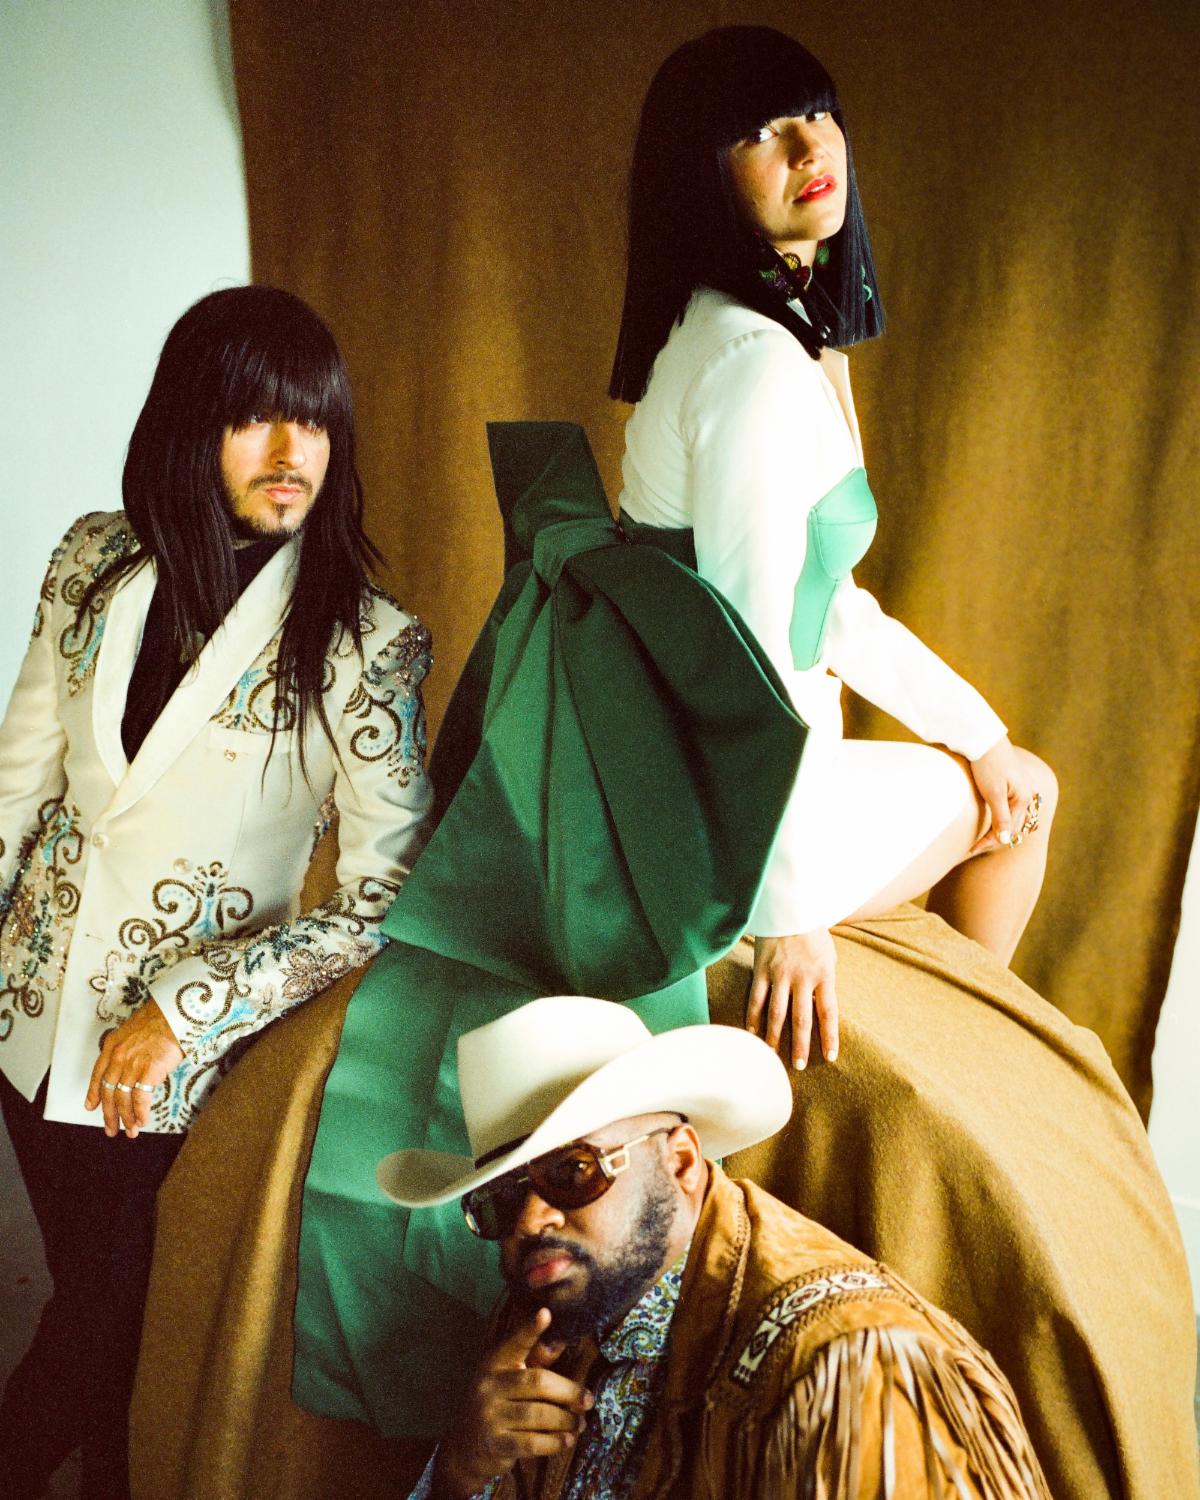 Khruangbin announce fall US tour dates with support from Nick Hakim